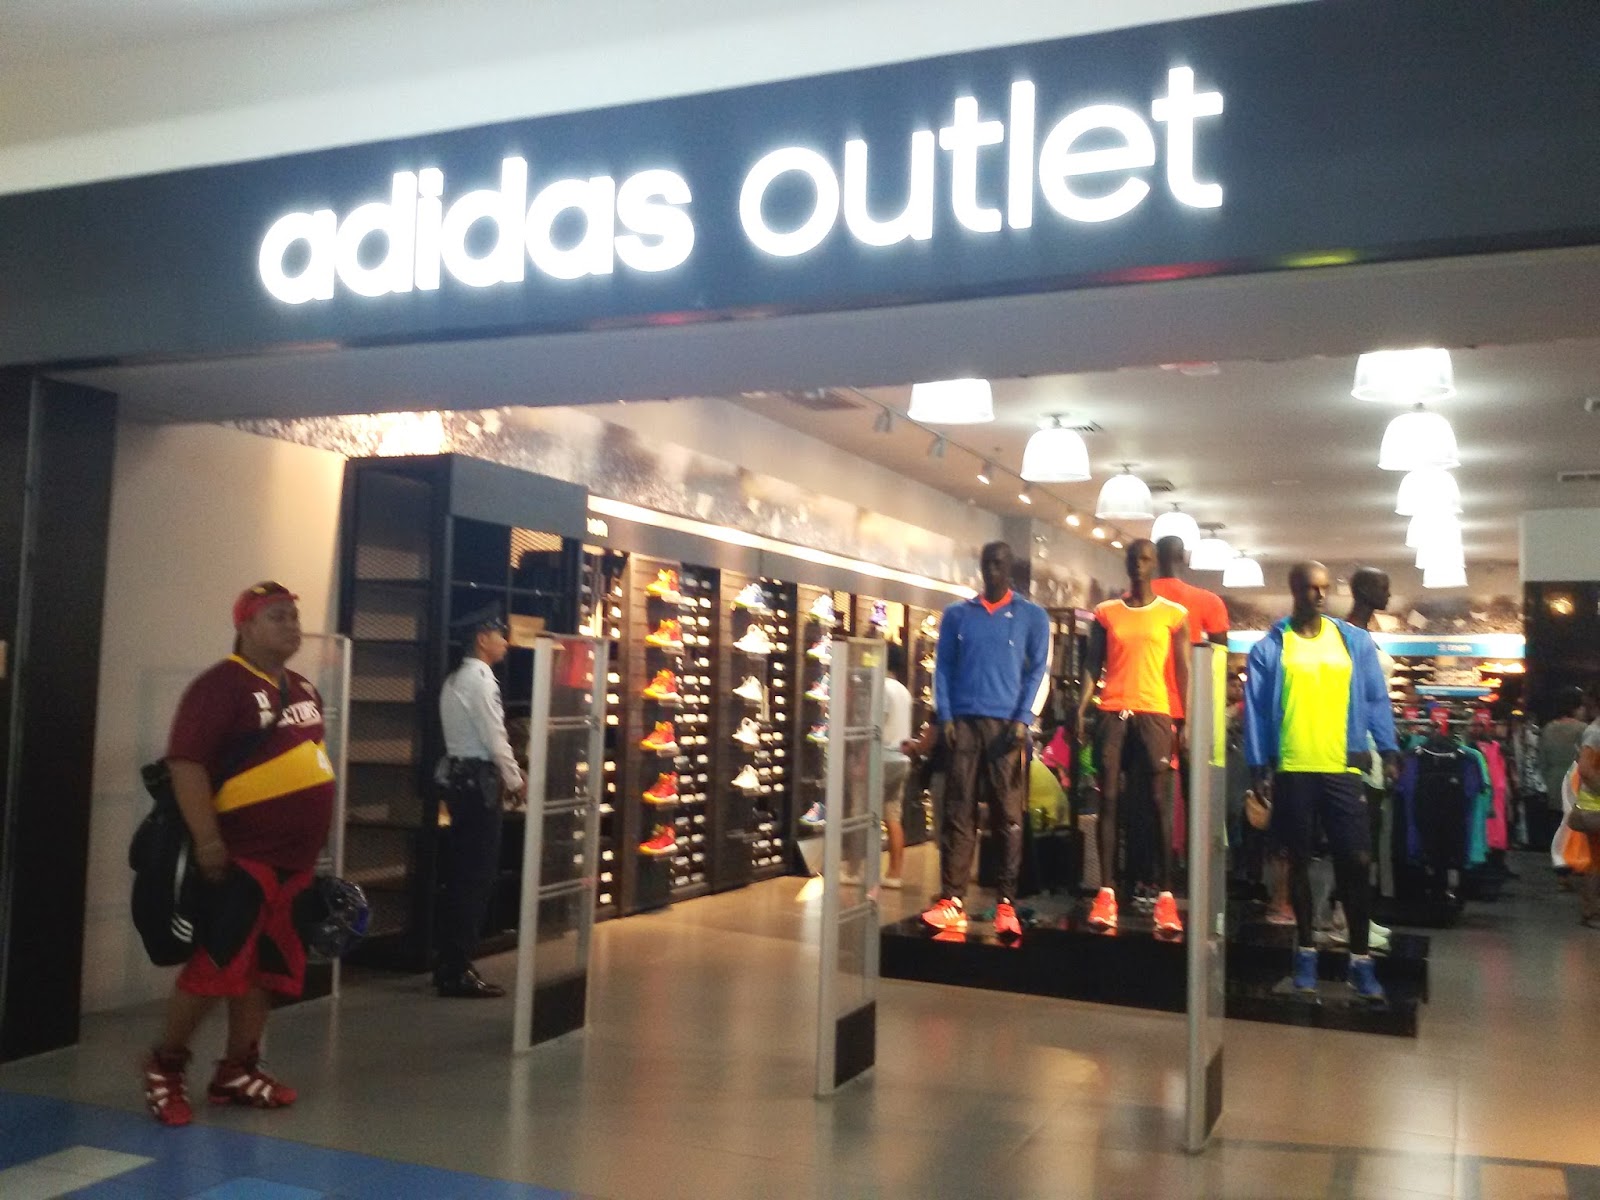 riverbanks adidas outlet